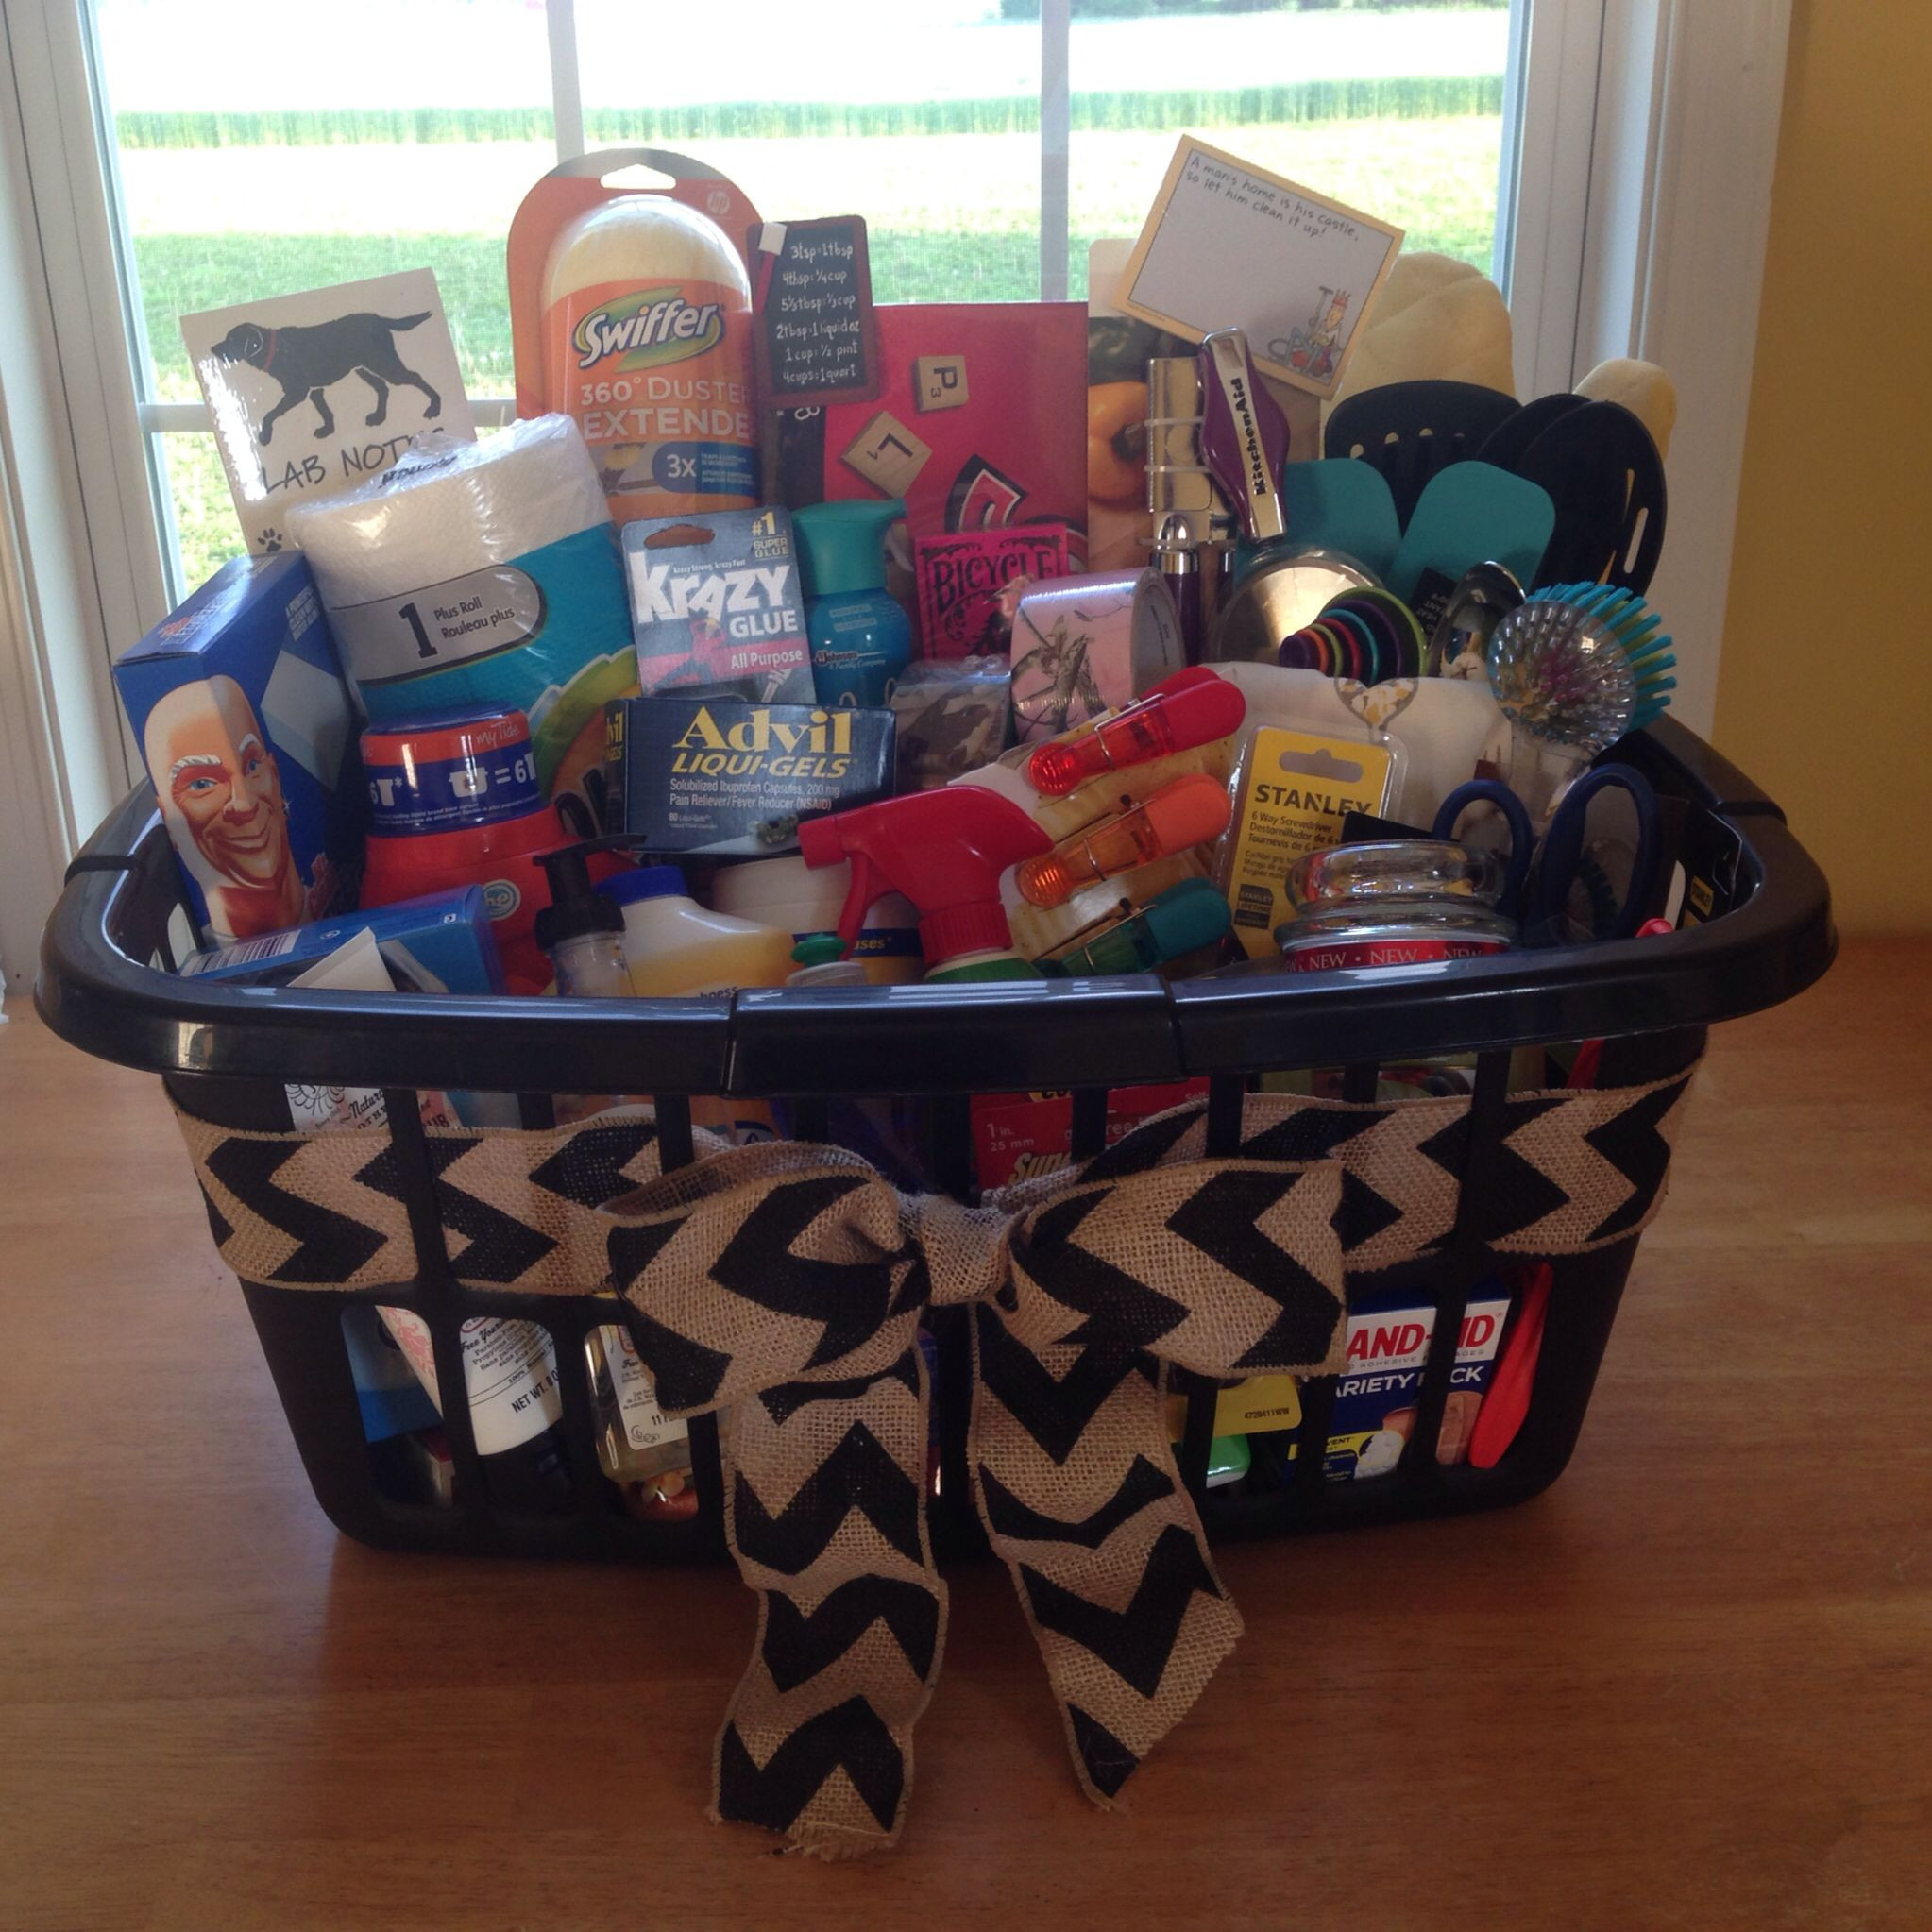 Homemade Housewarming Gift Basket Ideas
 Housewarming basket for some friends plete with